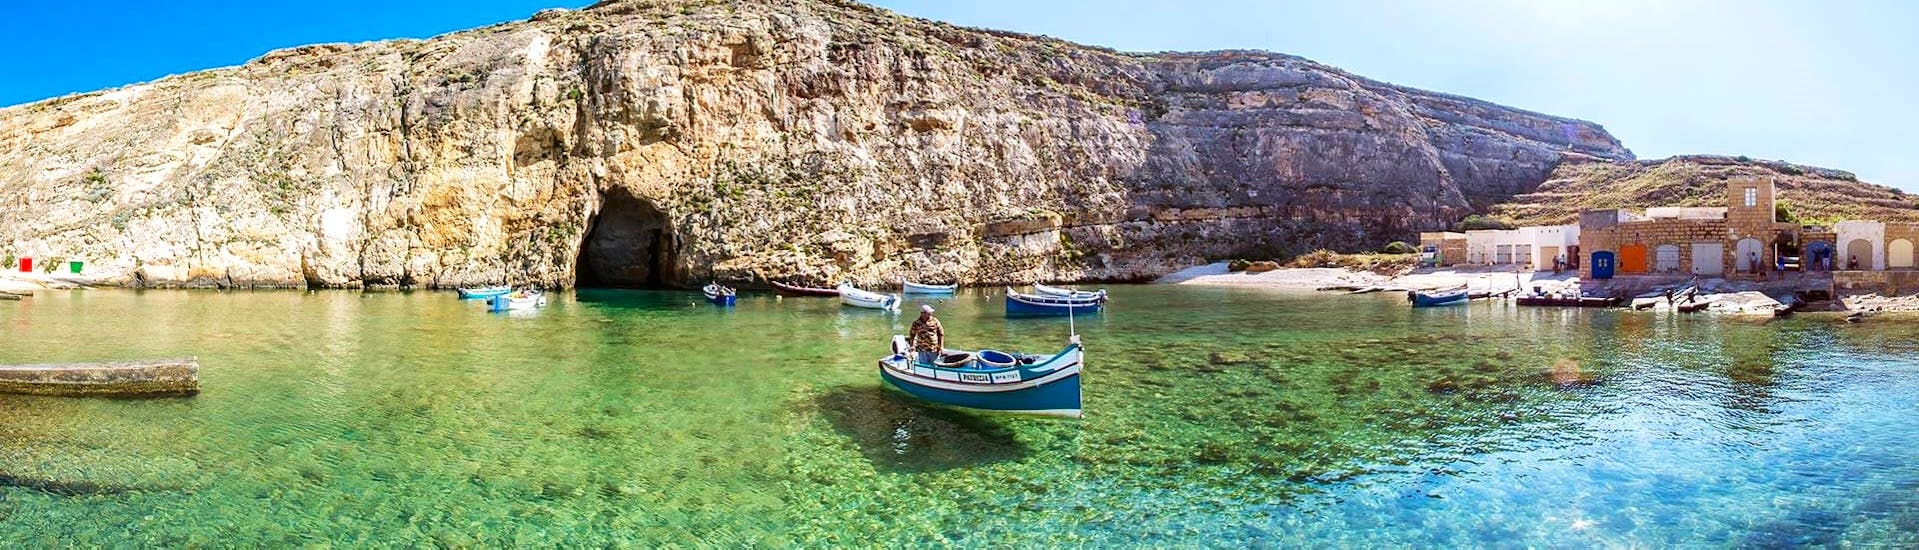 View during a Bus & Boat Tour to Gozo with Visit of the Citadella & Lunch with Supreme Travel Malta.